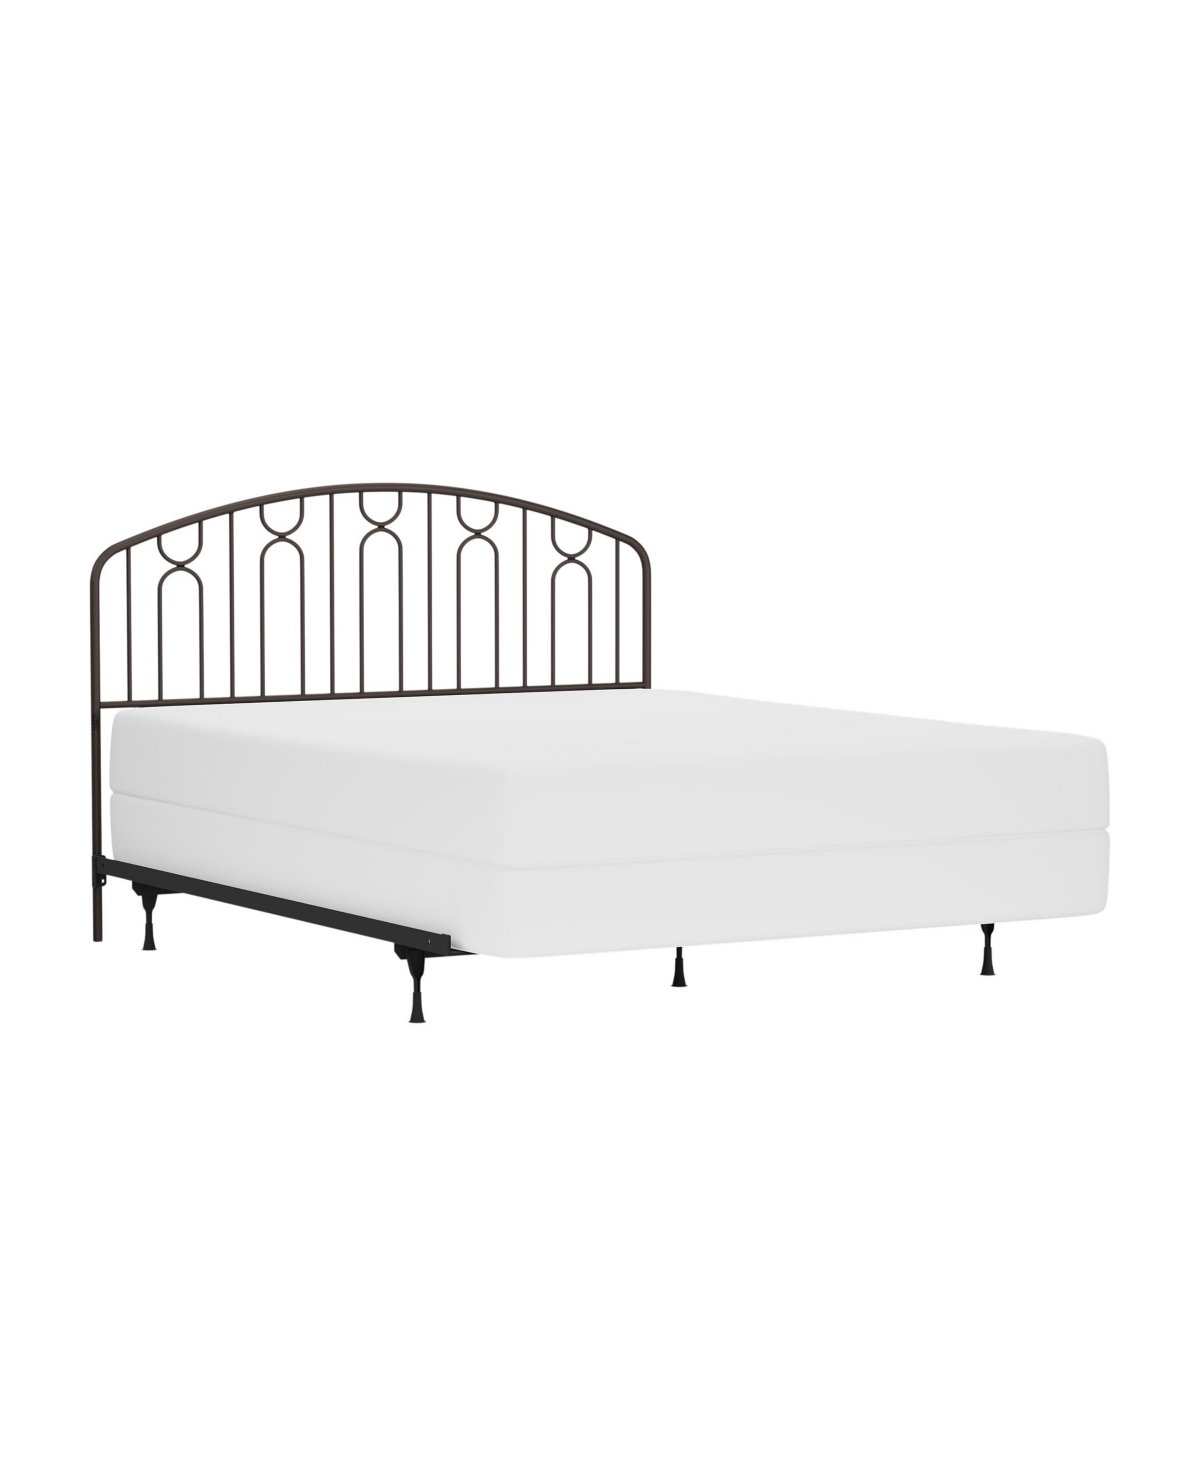 Hillsdale 44" Metal Riverbrooke Furniture Arch Scallop Full/queen Headboard With Frame In Bronze